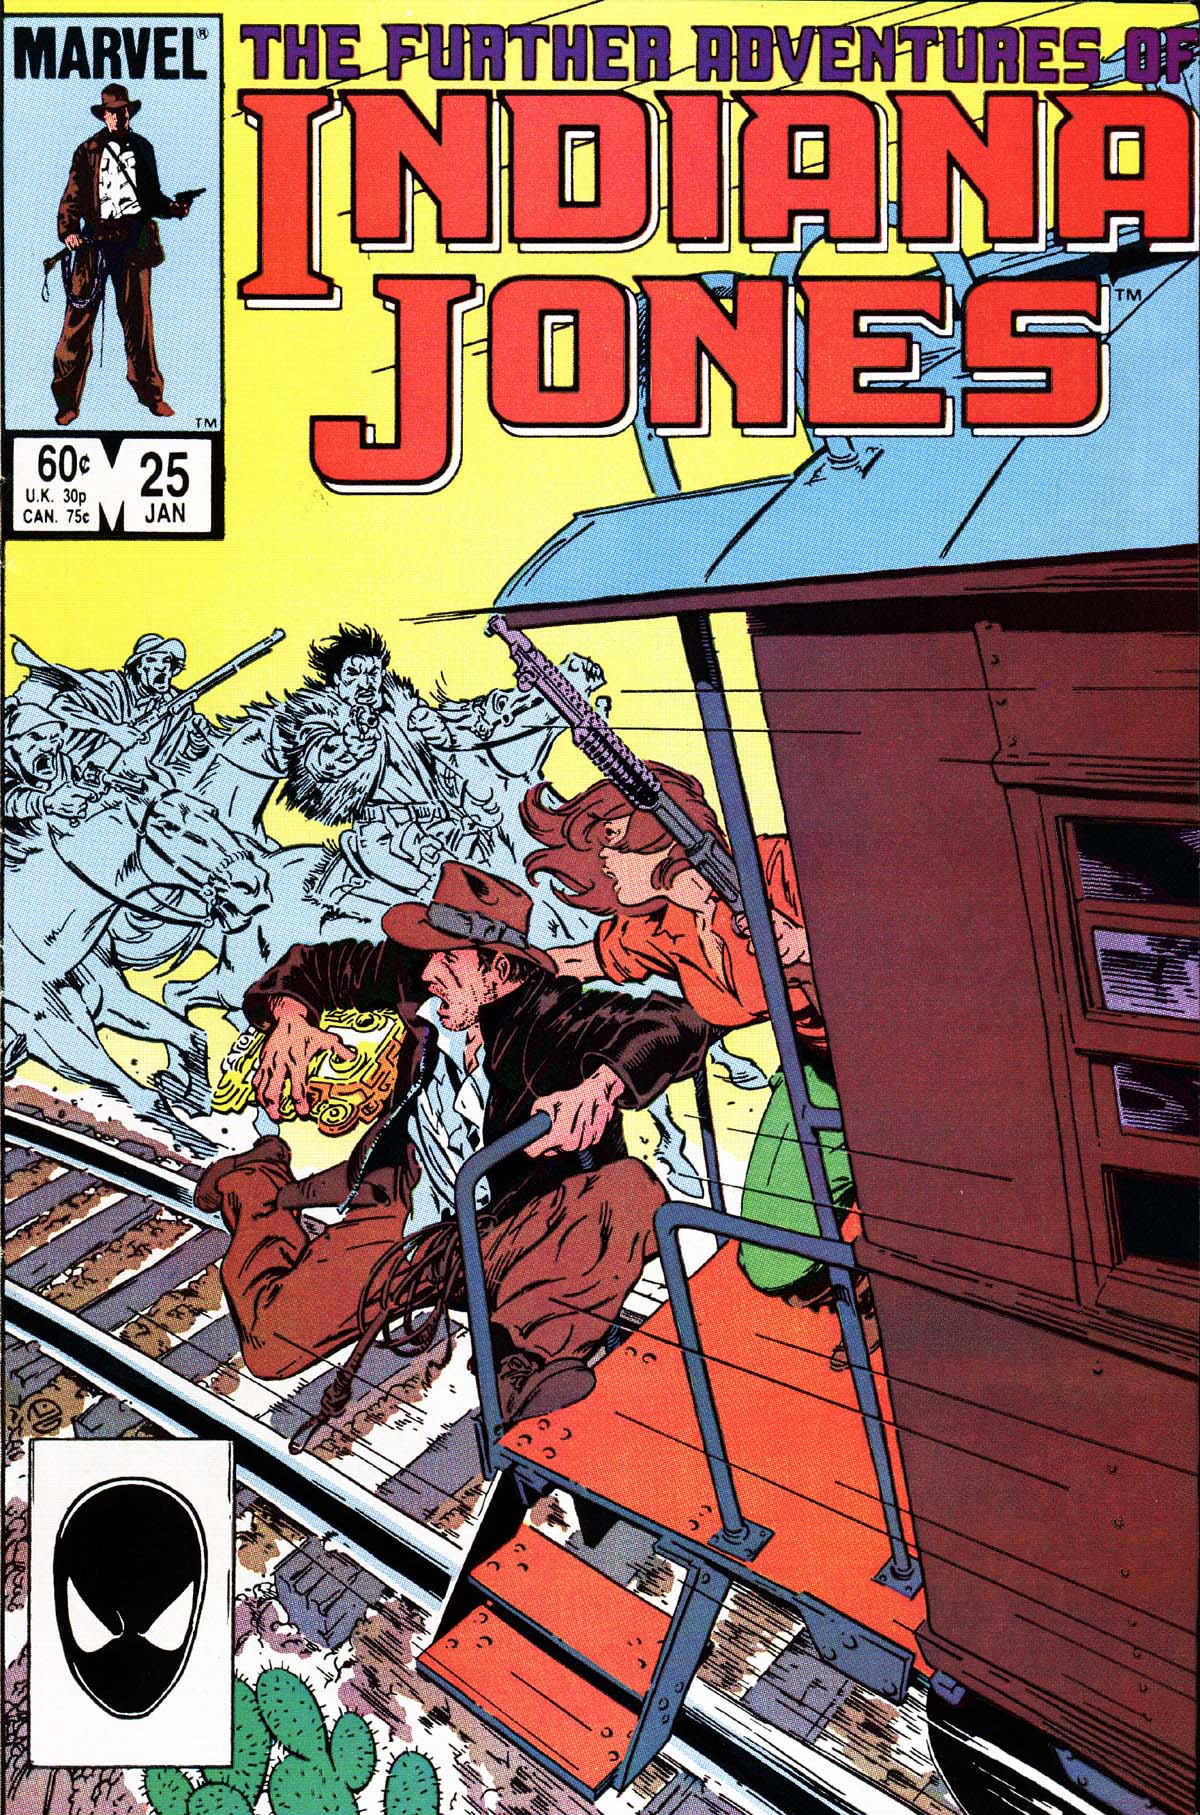 Read online The Further Adventures of Indiana Jones comic -  Issue #25 - 1